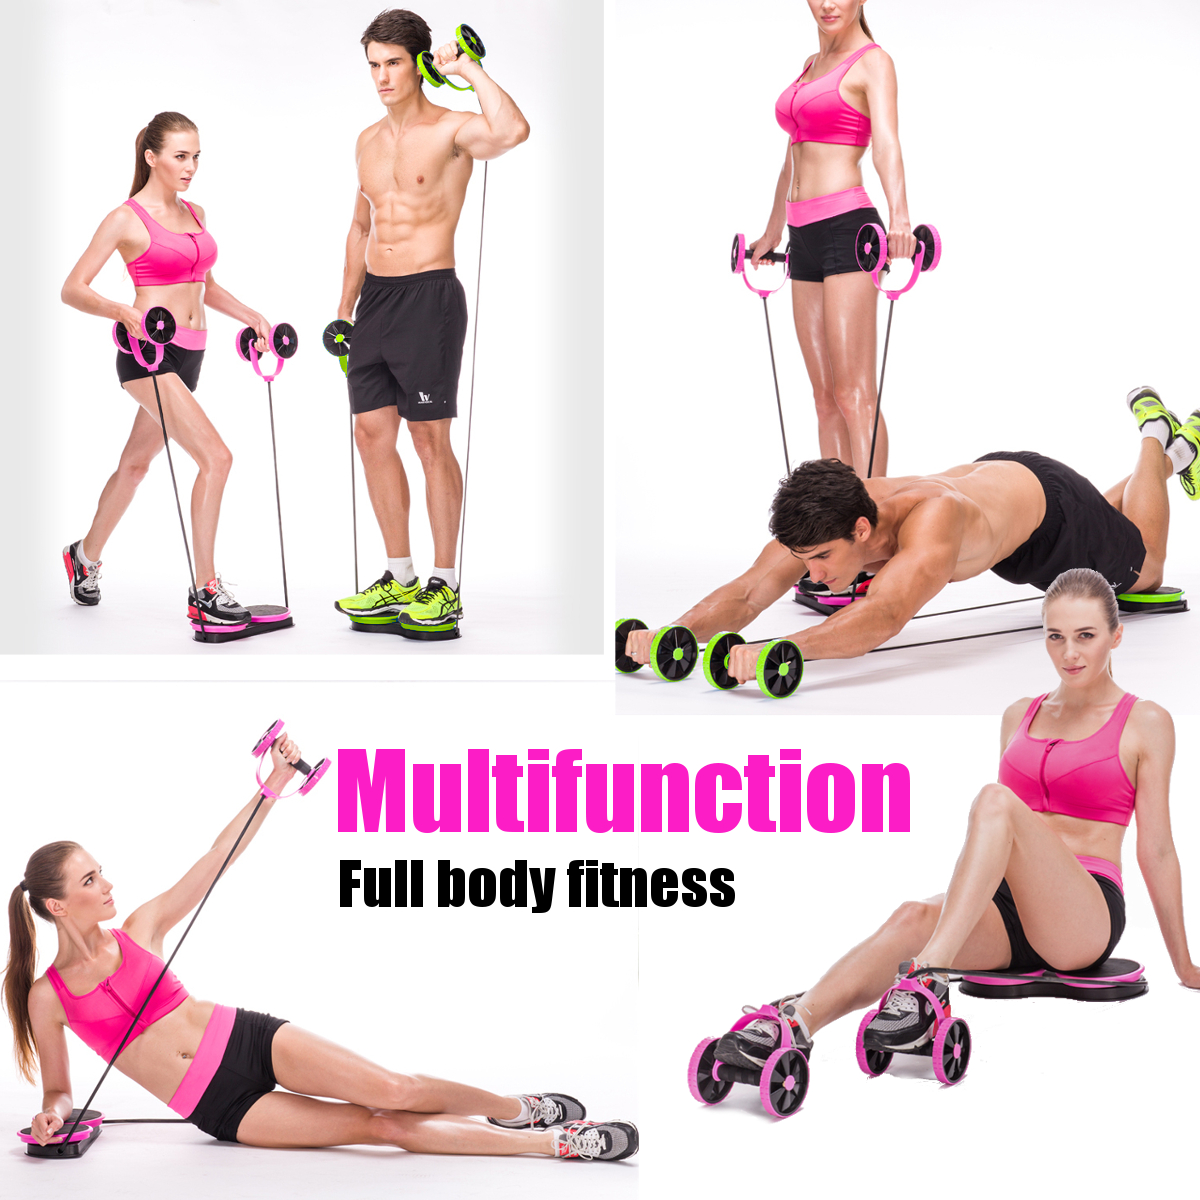 Multi-Function-Home-Abdominal-Wheel-Roller-Arm-Waist-Leg-Muscle-Trainer-Fitness-Exercise-Tools-1679317-4